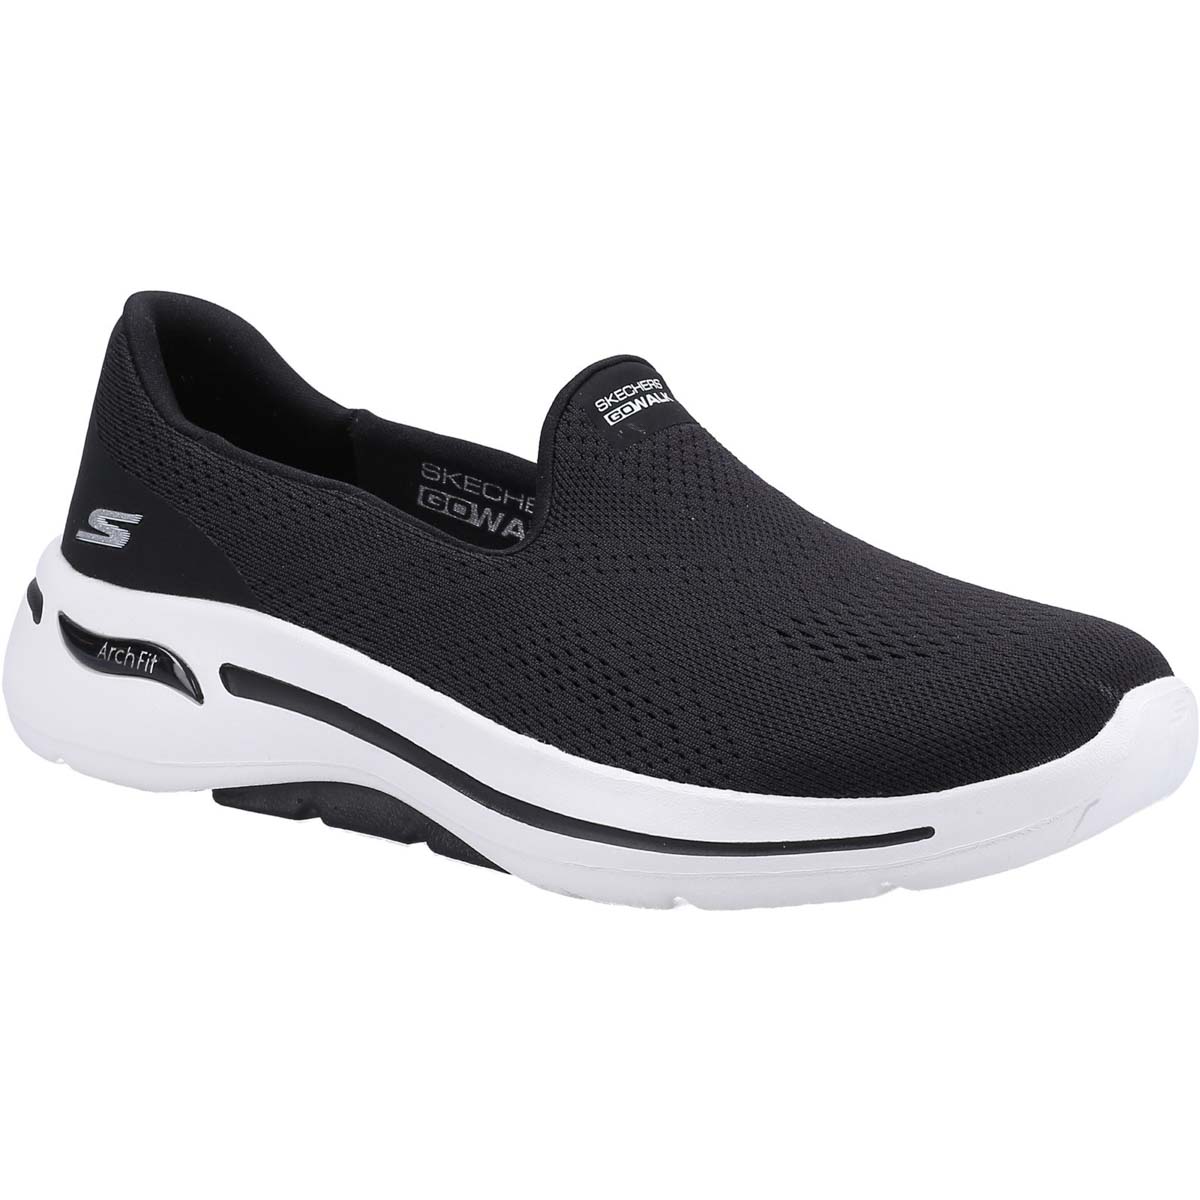 Skechers Go Walk Arch Fit Imagined Black Womens Trainers 124483 In Size 8 In Plain Black